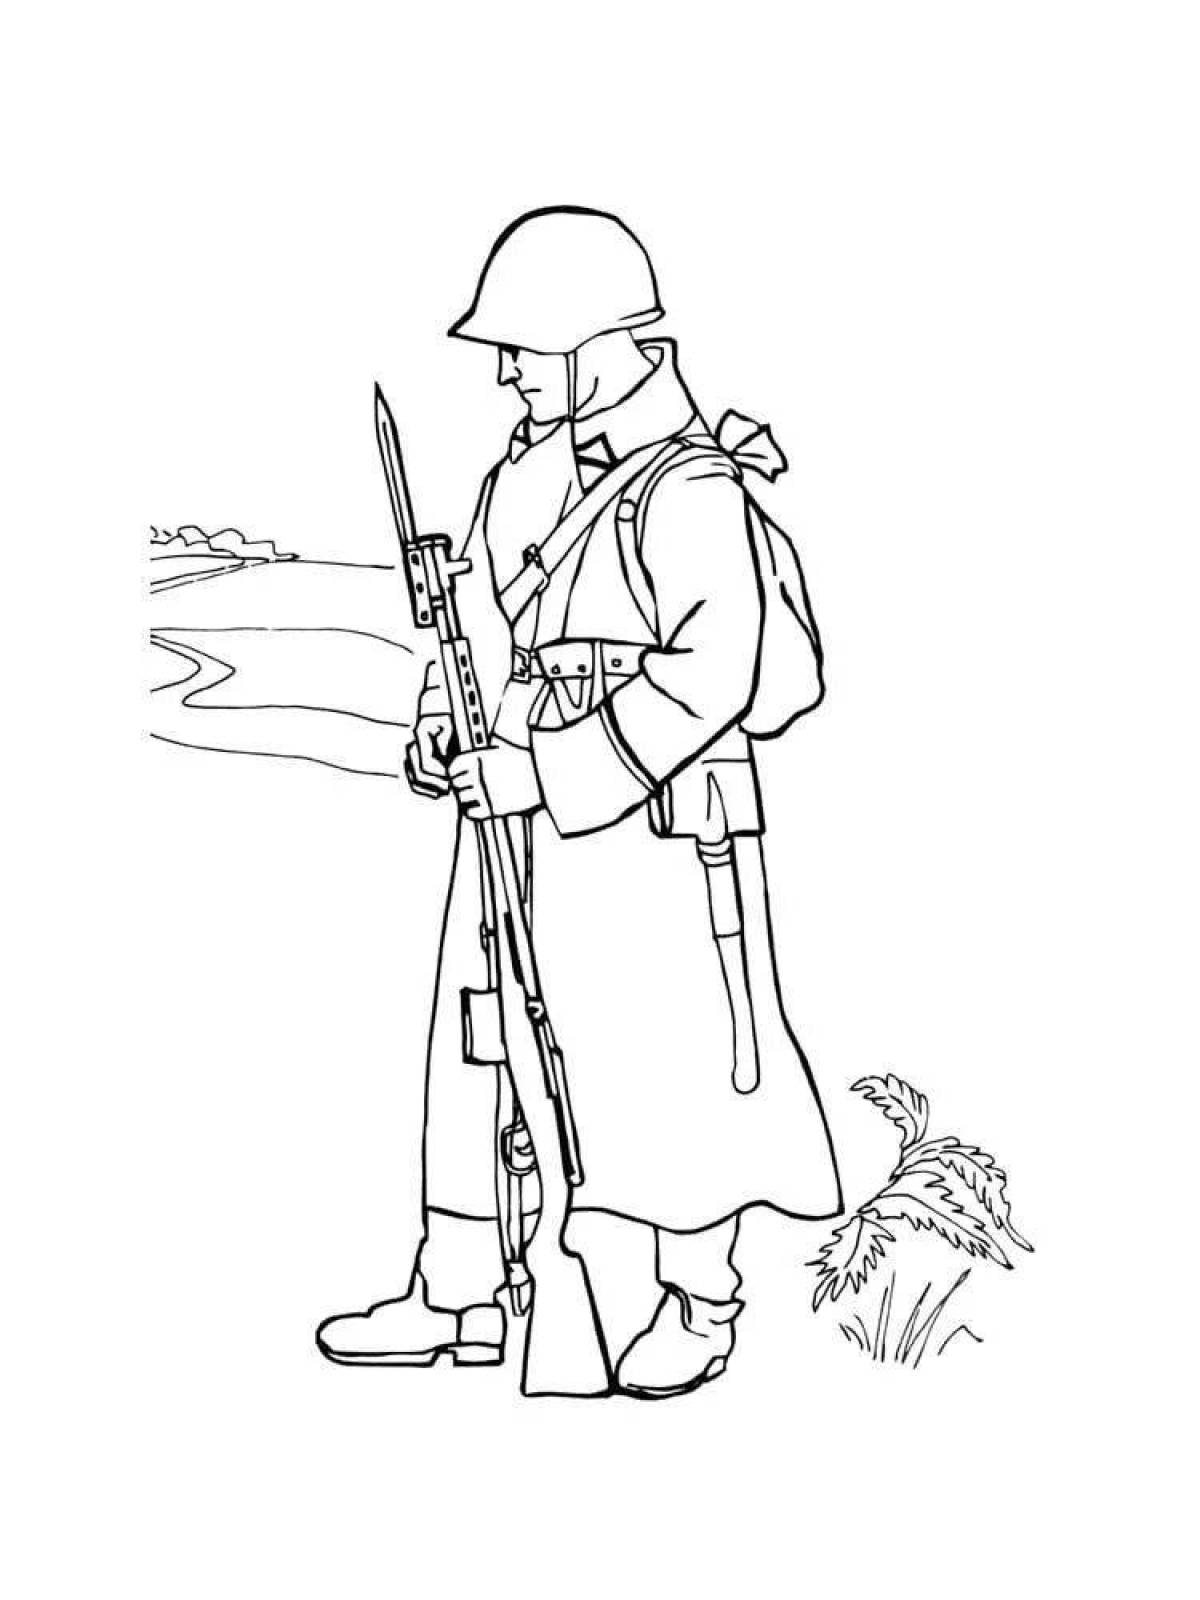 Amazing war hero coloring pages